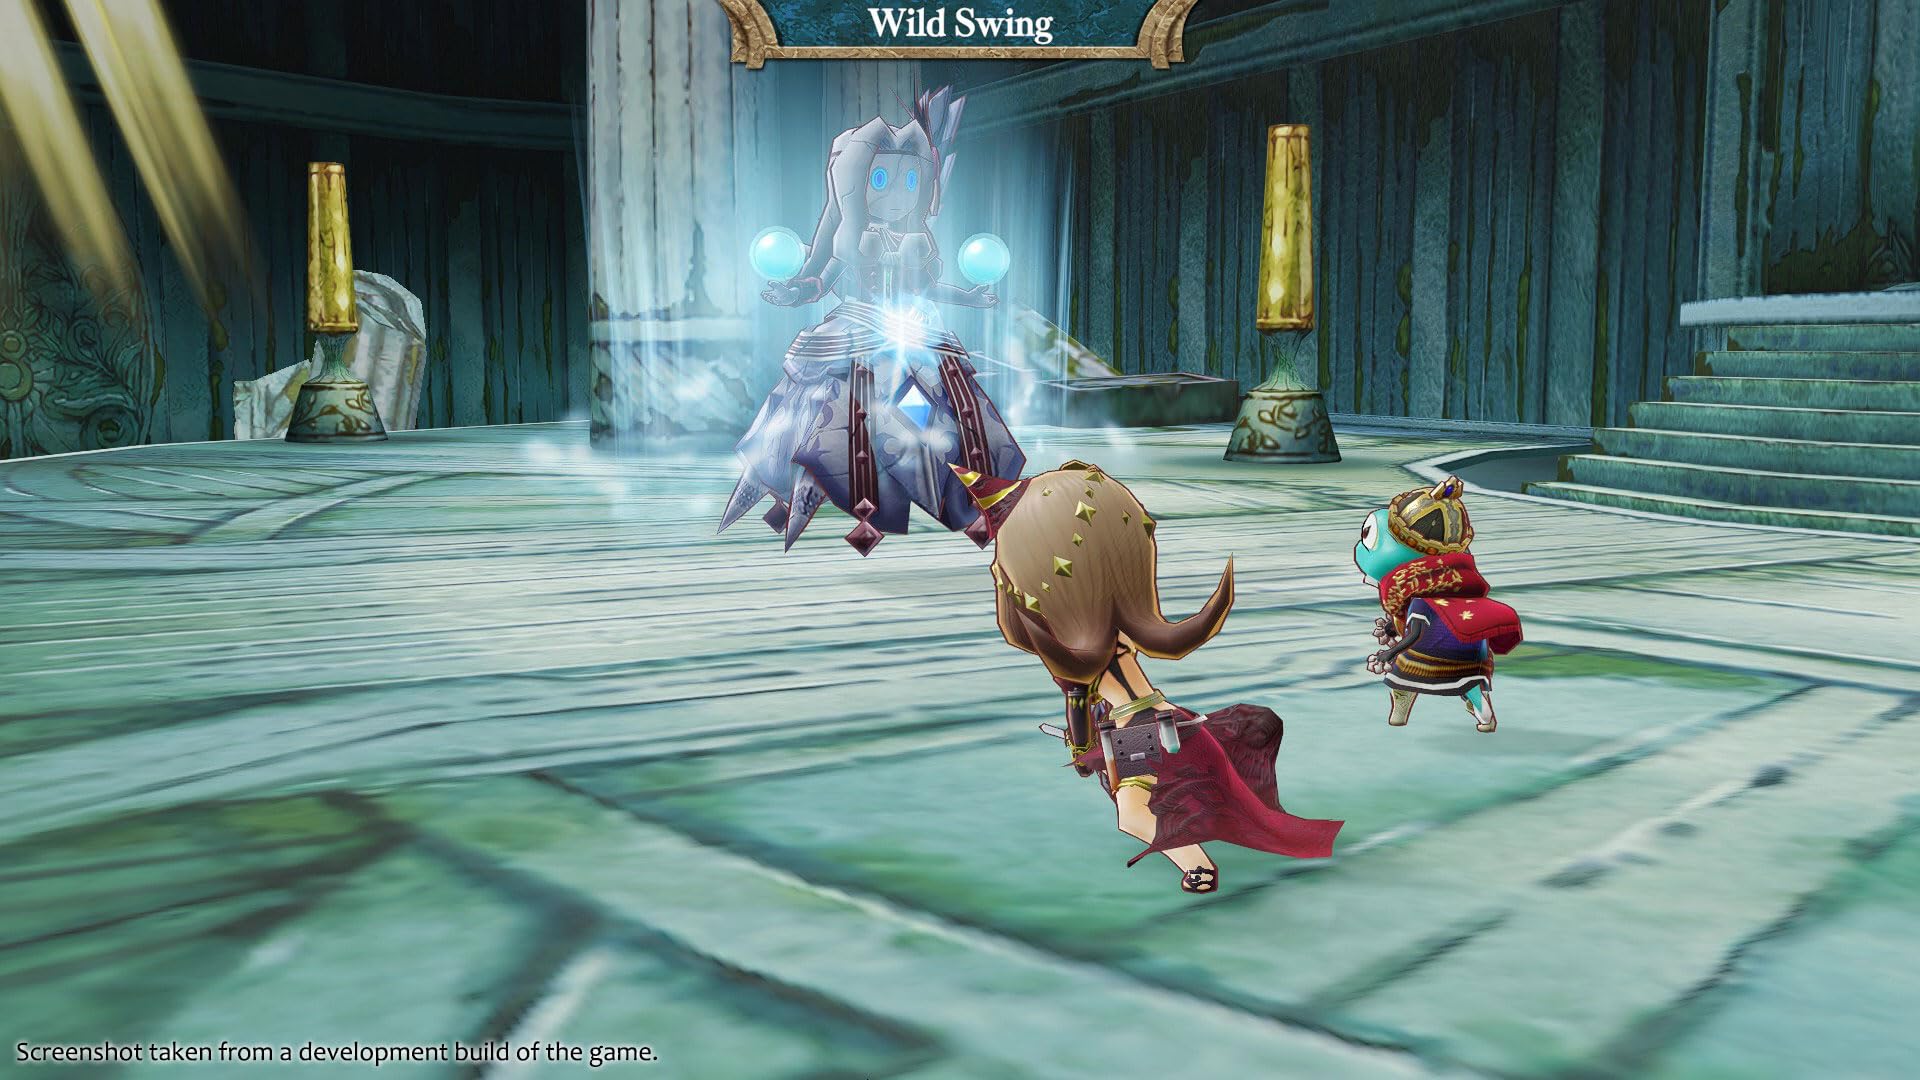 The Legend of Legacy HD Remastered: Deluxe Edition - PlayStation 4